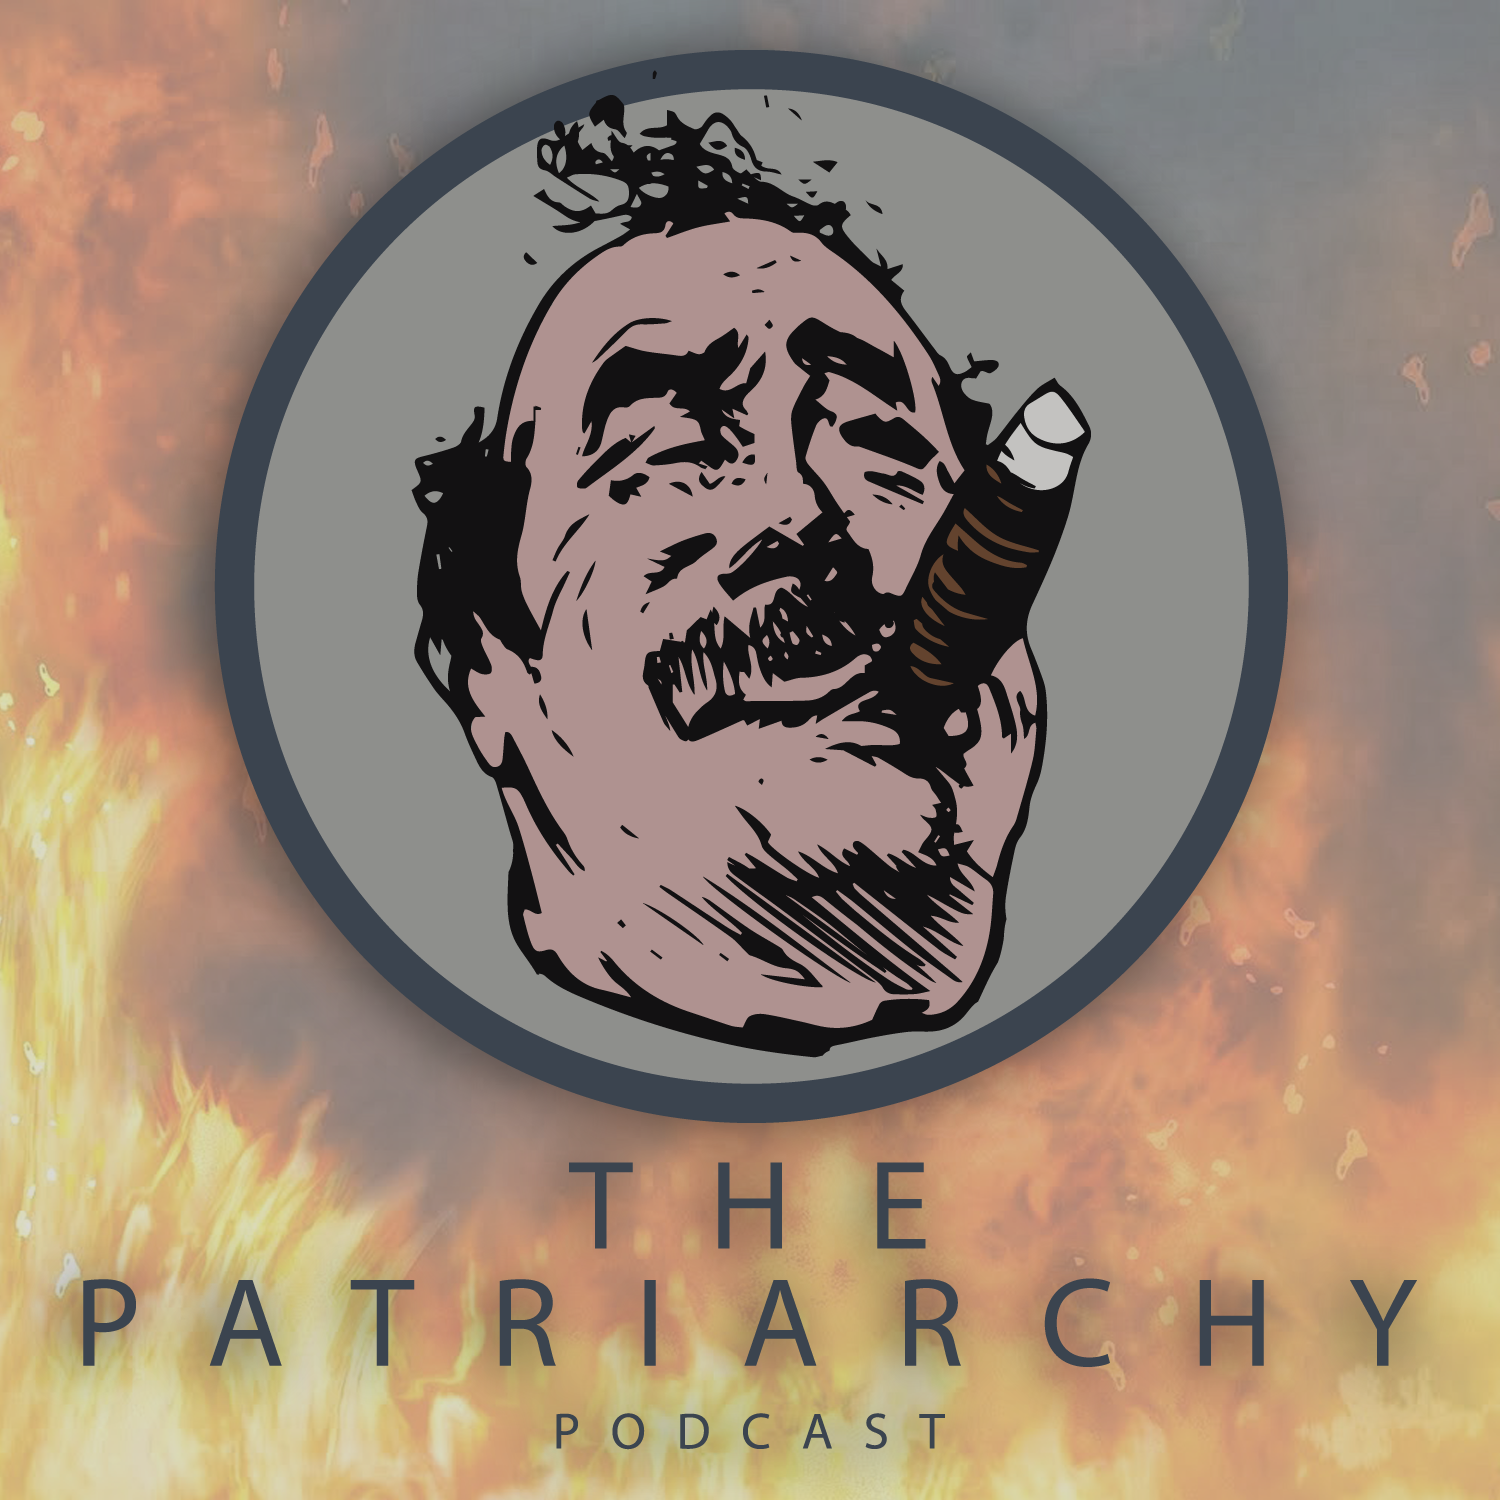 The Patriarchy Podcast: Twitter, Conspiracies, and ‘Rona (Ep 39)